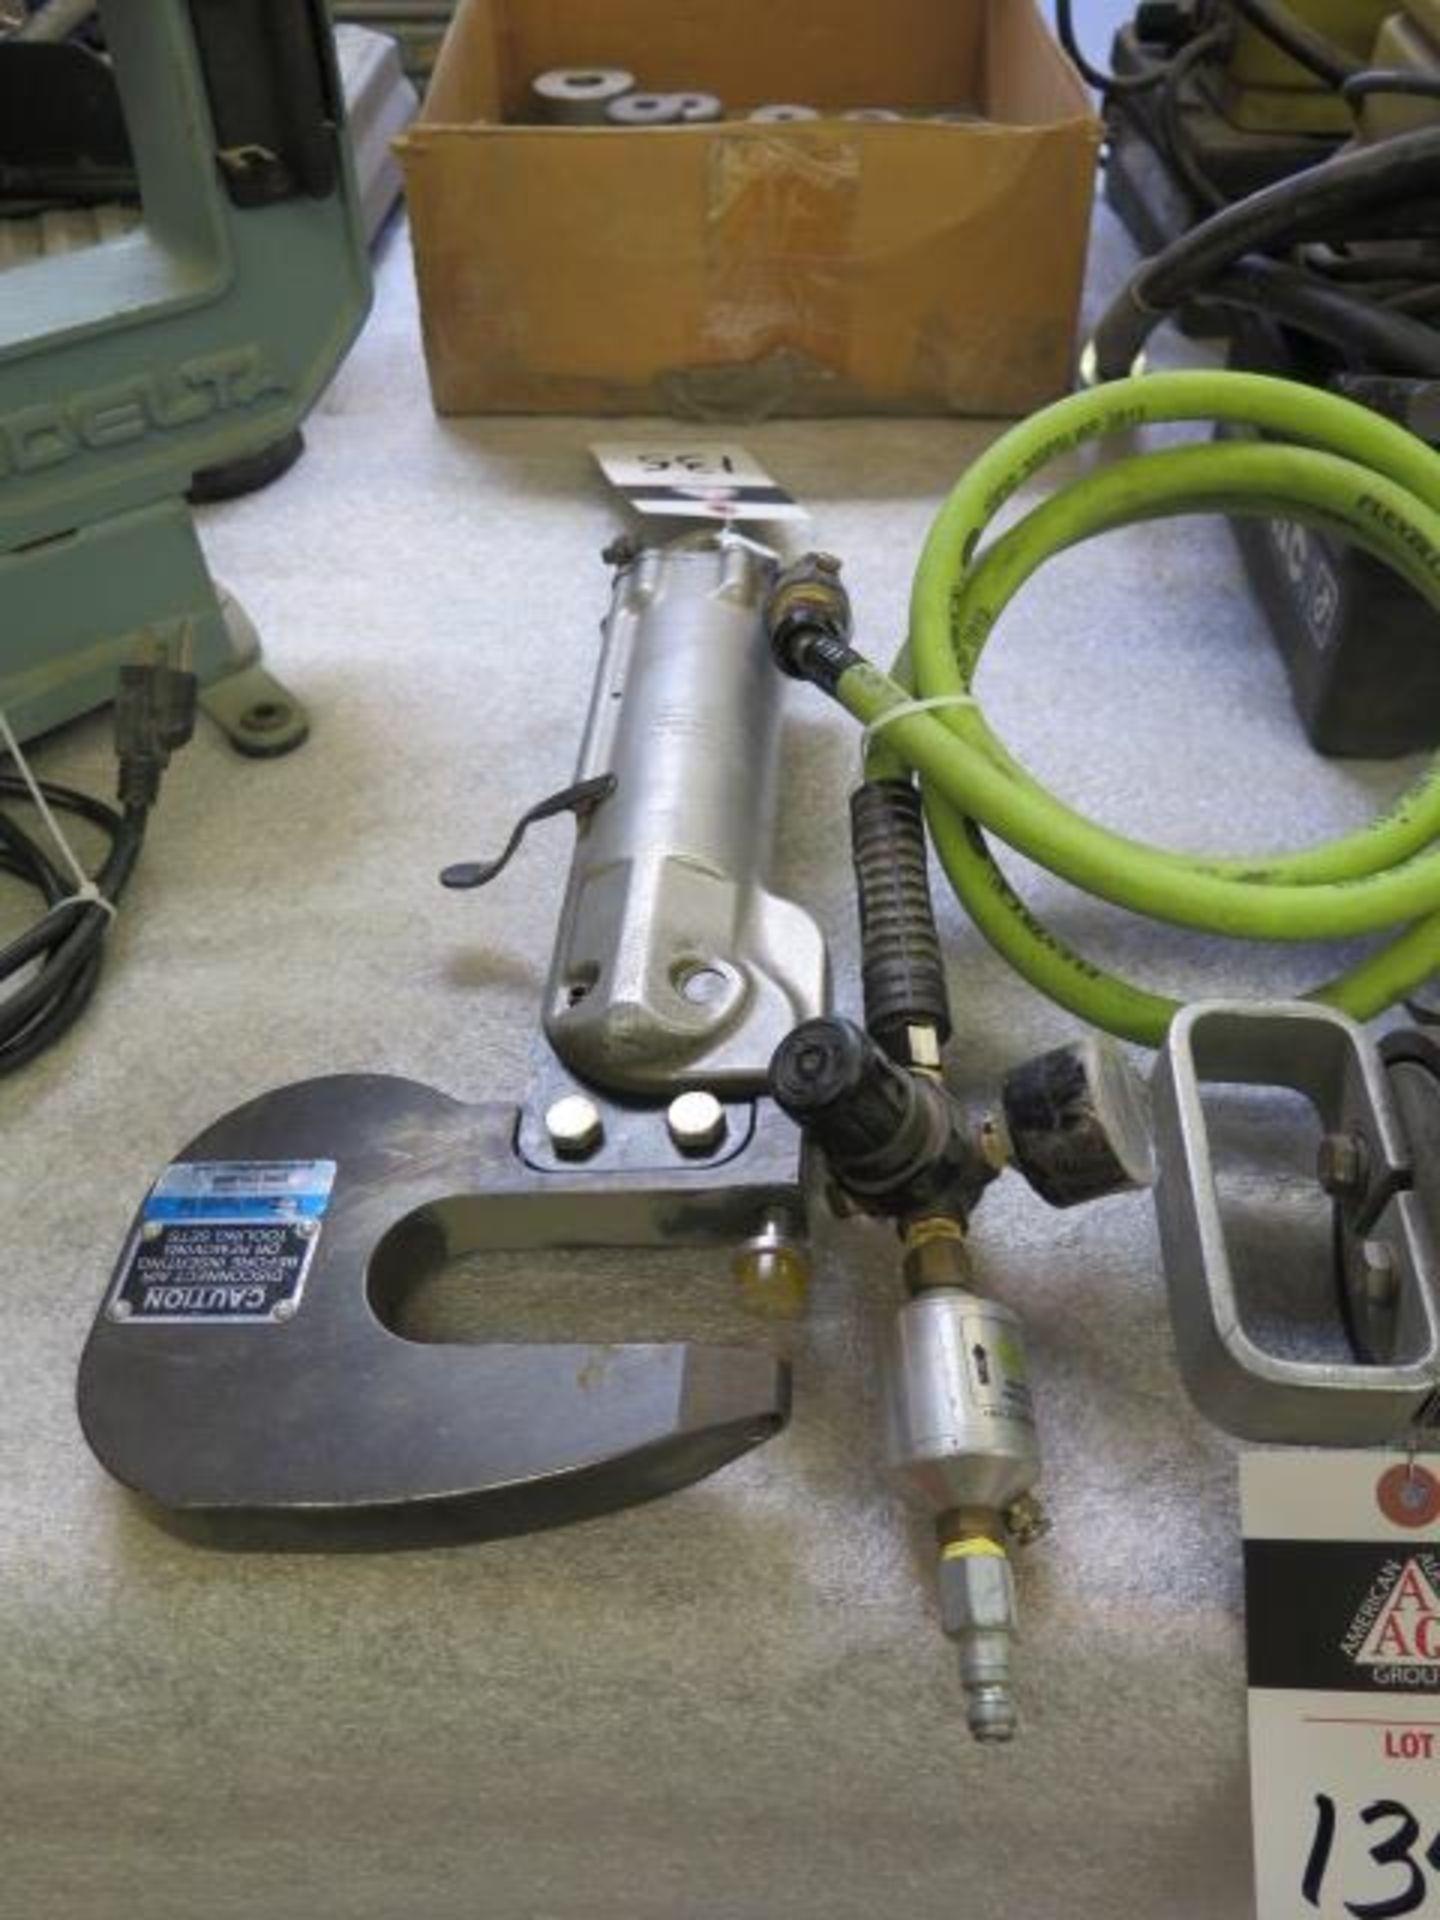 General Pneumatic mdl. 6000C Pneumatic Compression Riveter s/n 7818 w/ 4" Throat (SOLD AS-IS - NO